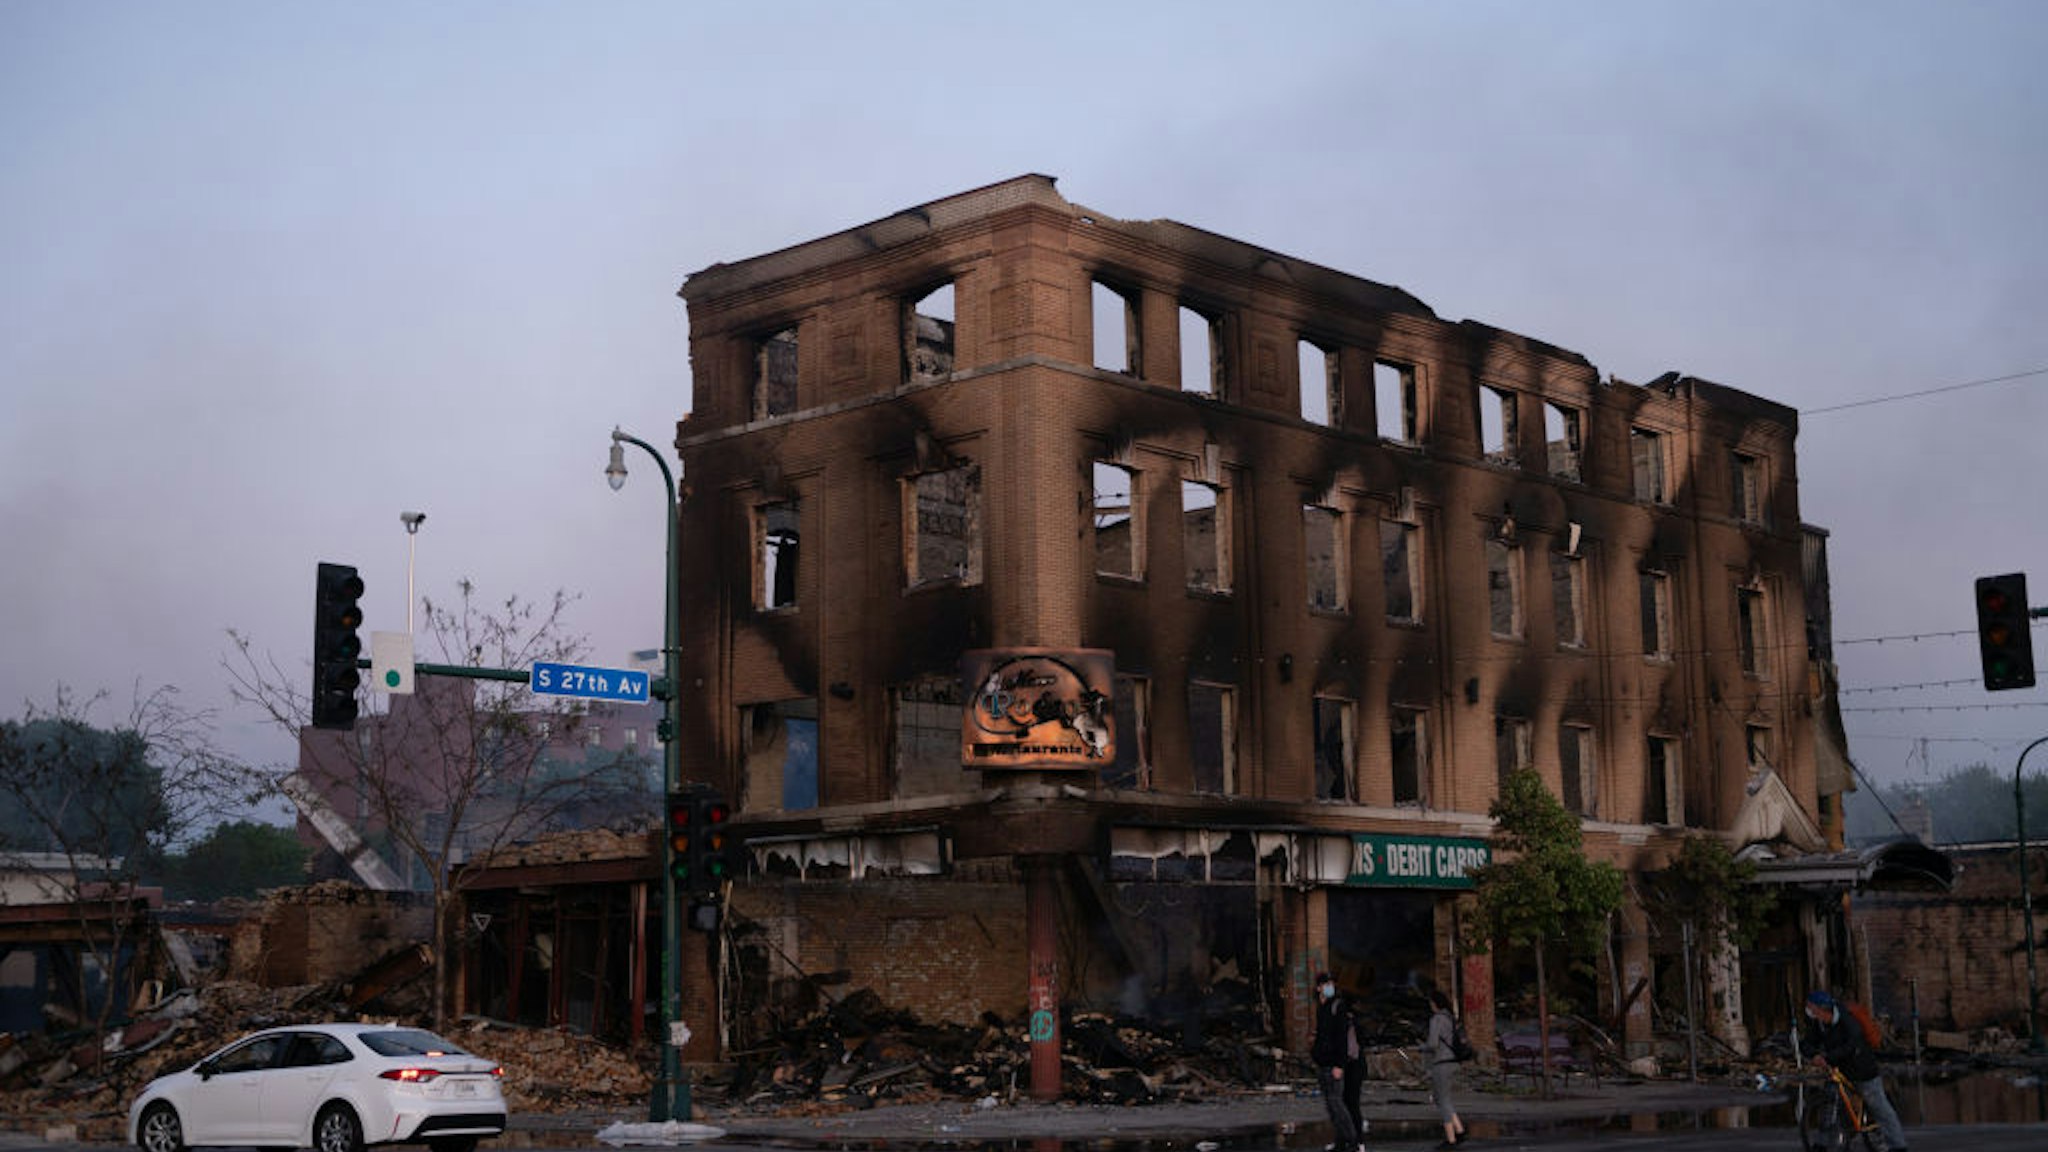 The shell of a building that was burnt during the earlier fires sits still smoldering in Minneapolis, United States, on May 29, 2020. Protests continued following the death of George Floyd, who died after being restrained by Minneapolis police officers on Memorial Day. (Photo by Zach D Roberts/NurPhoto via Getty Images)